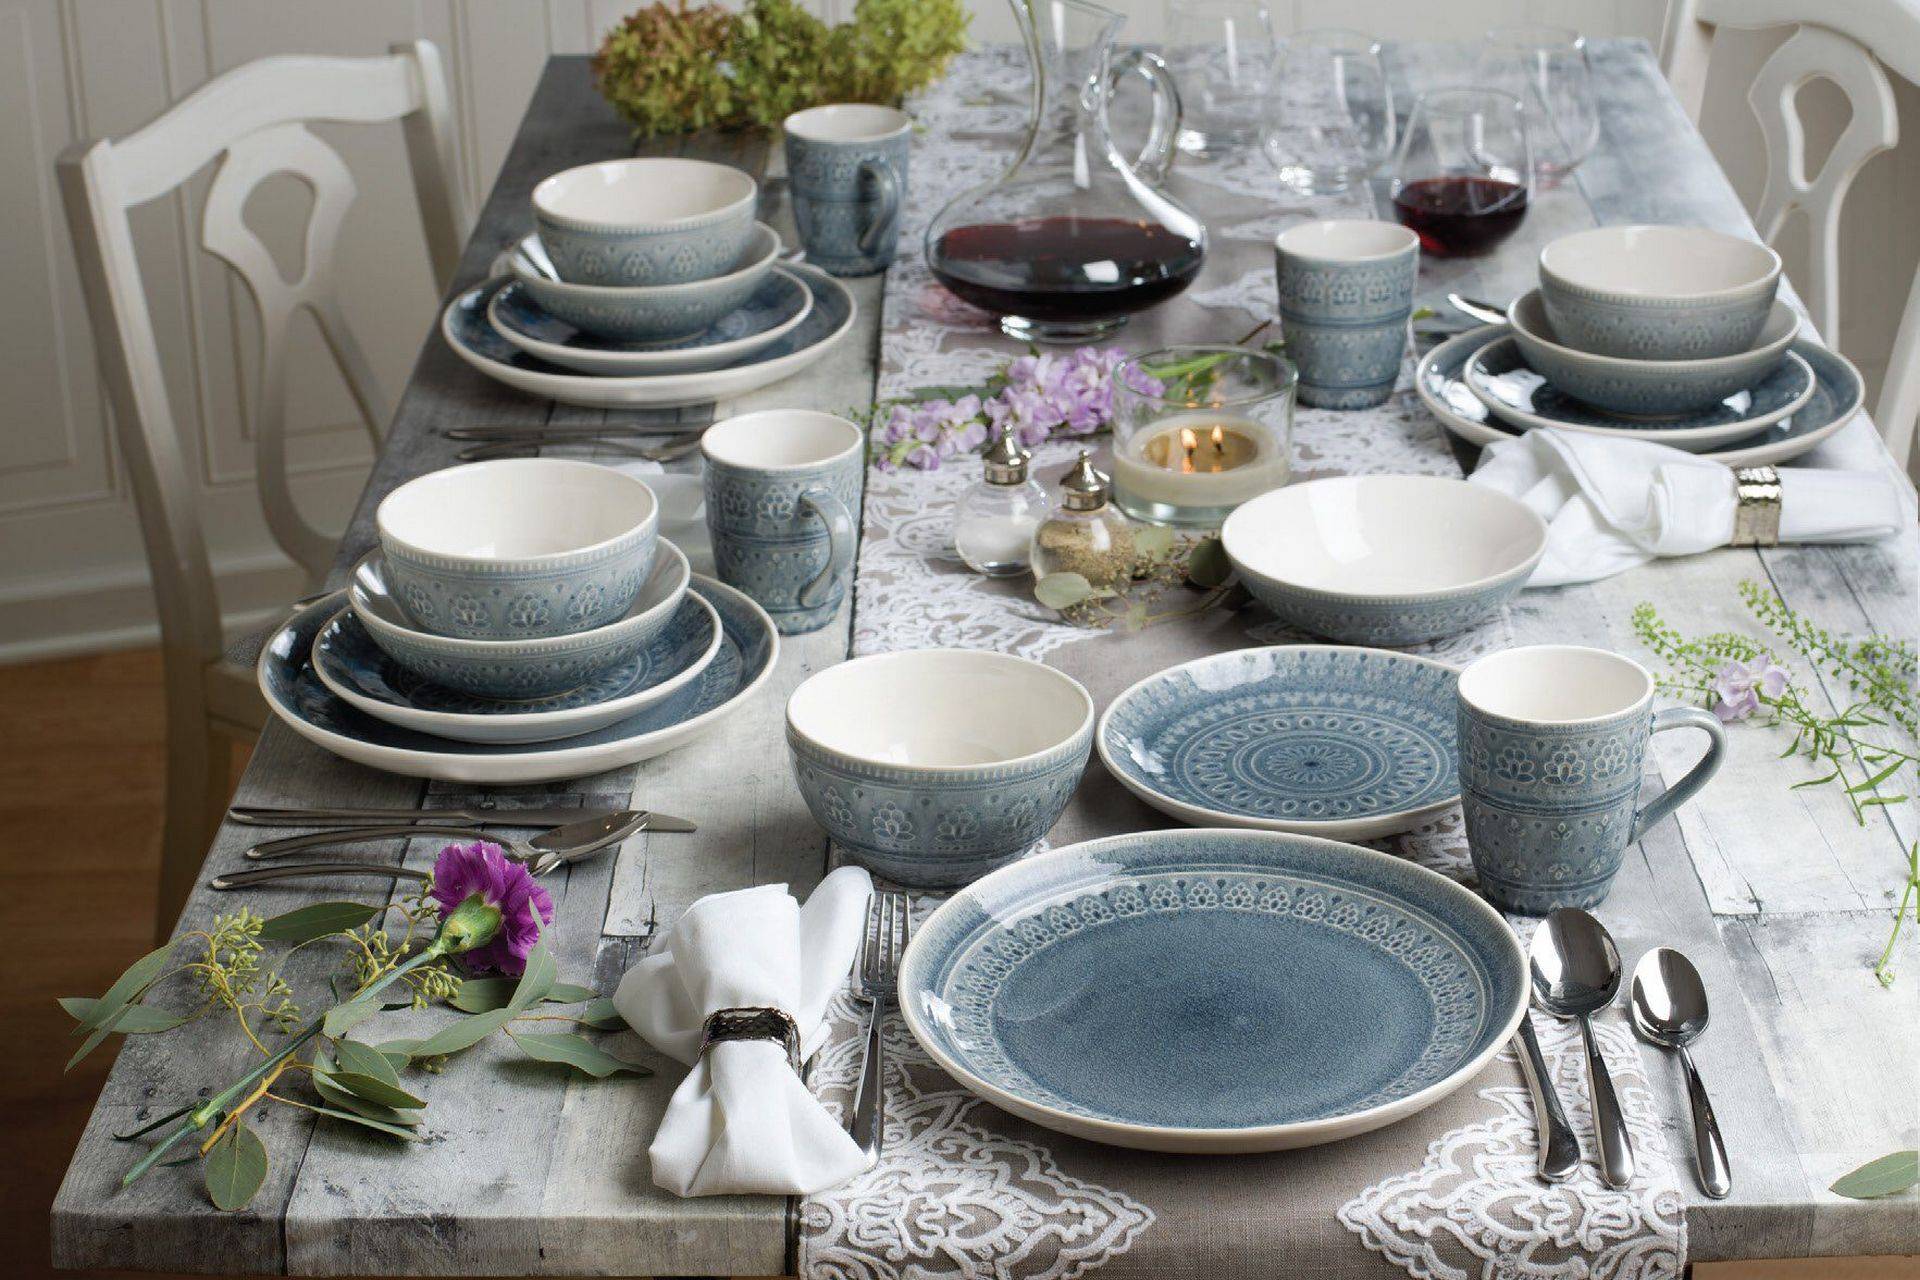 Buy porcelain dinner dish sets at an exceptional price